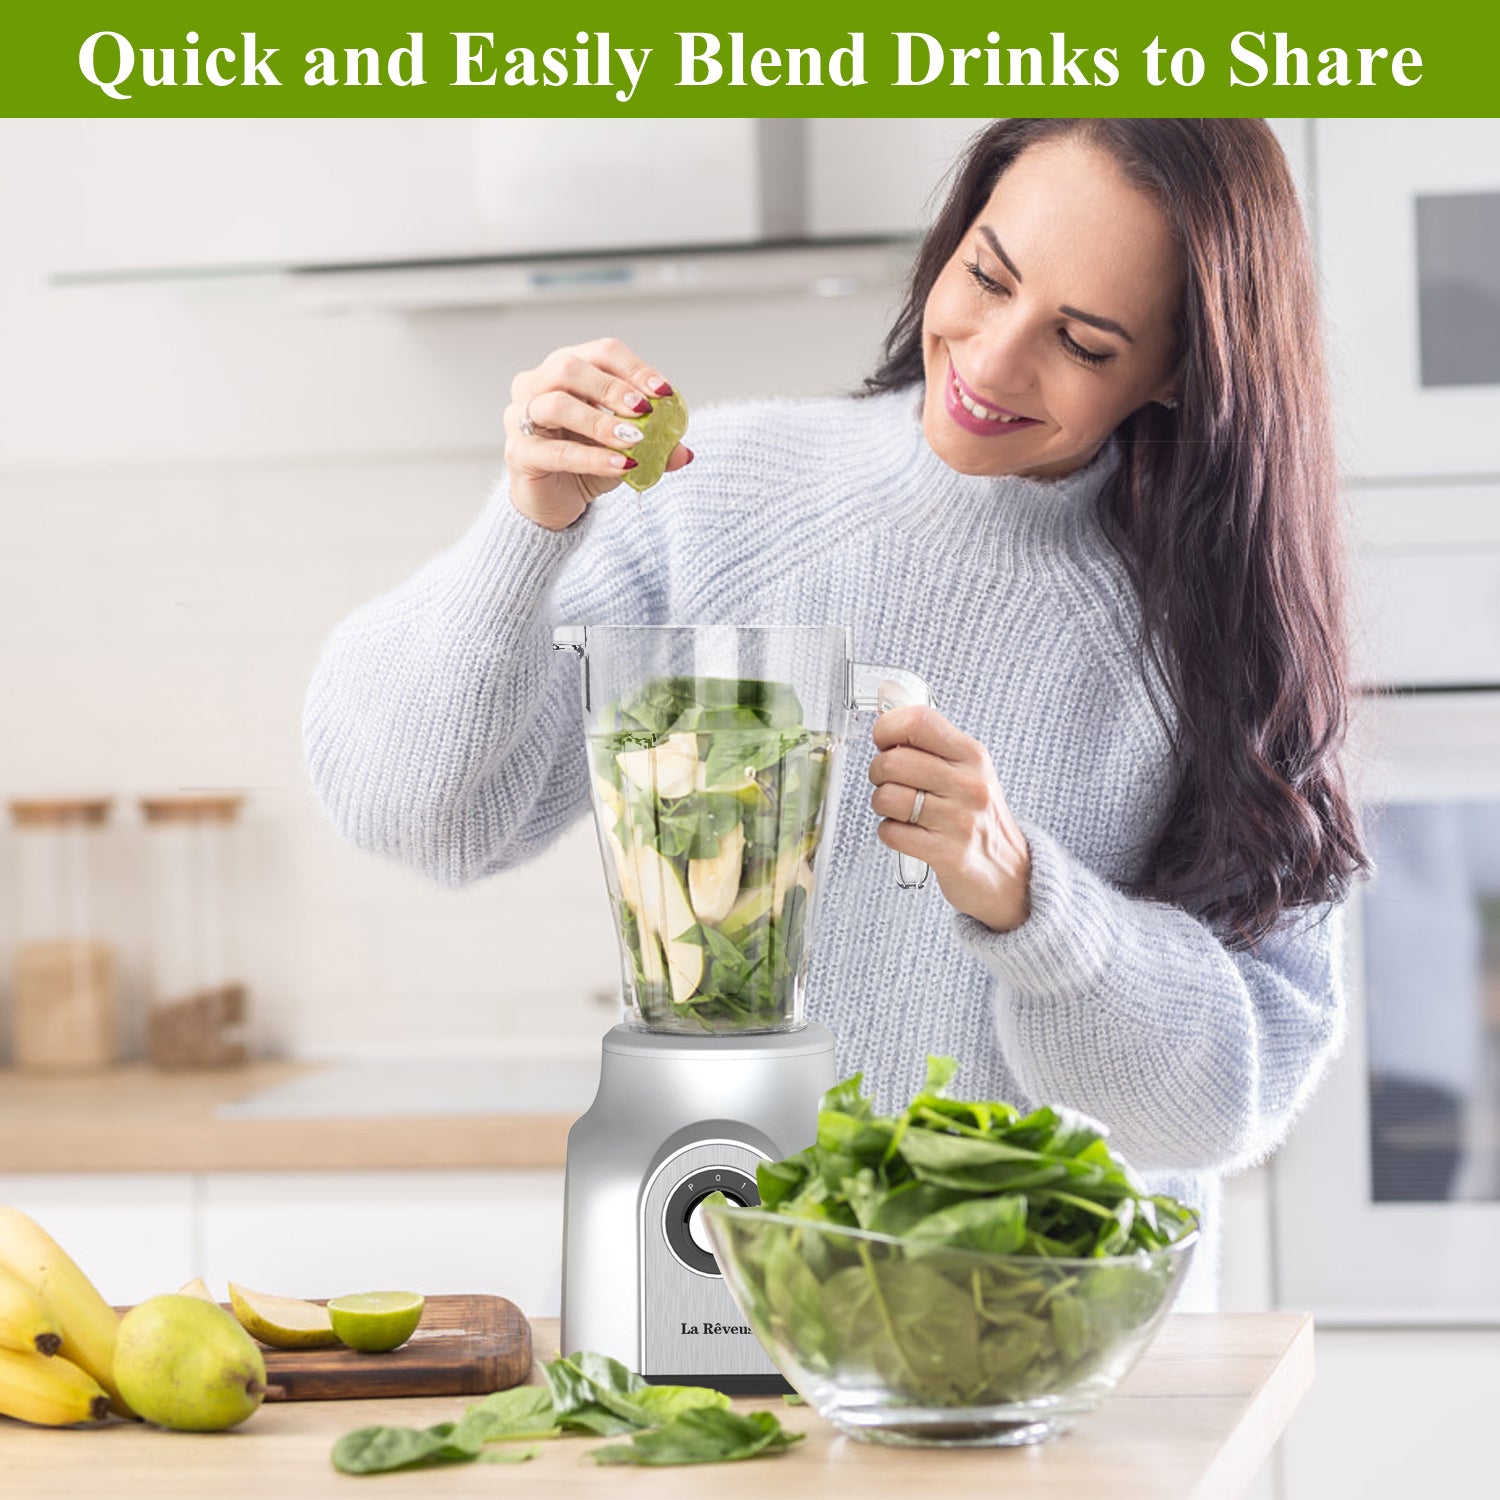 Countertop Blender, Professional Blender for Smoothies, Shakes